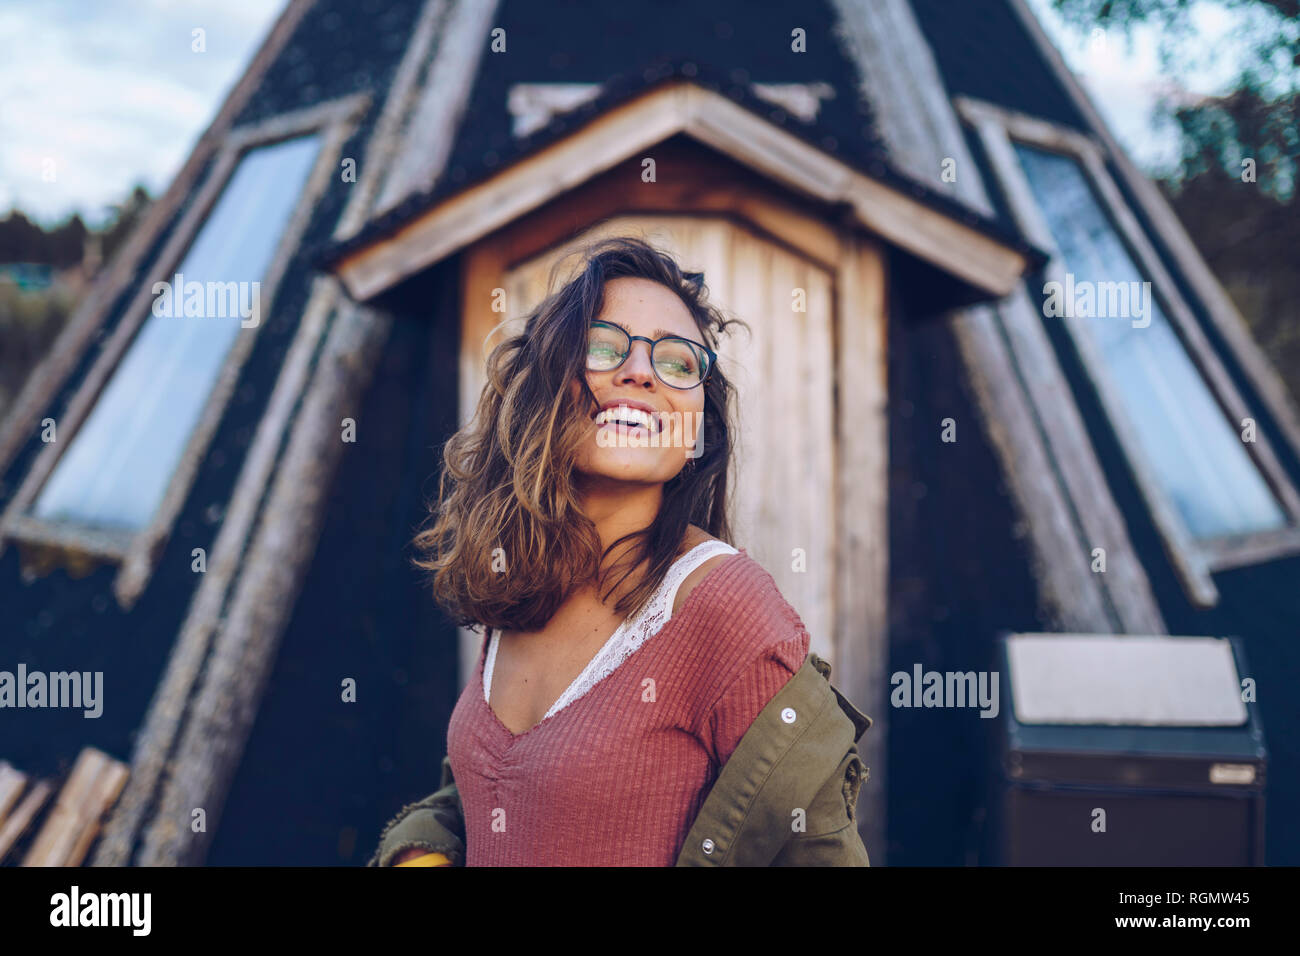 Portrait of a laughing young woman infront of a Finnish house Stock Photo